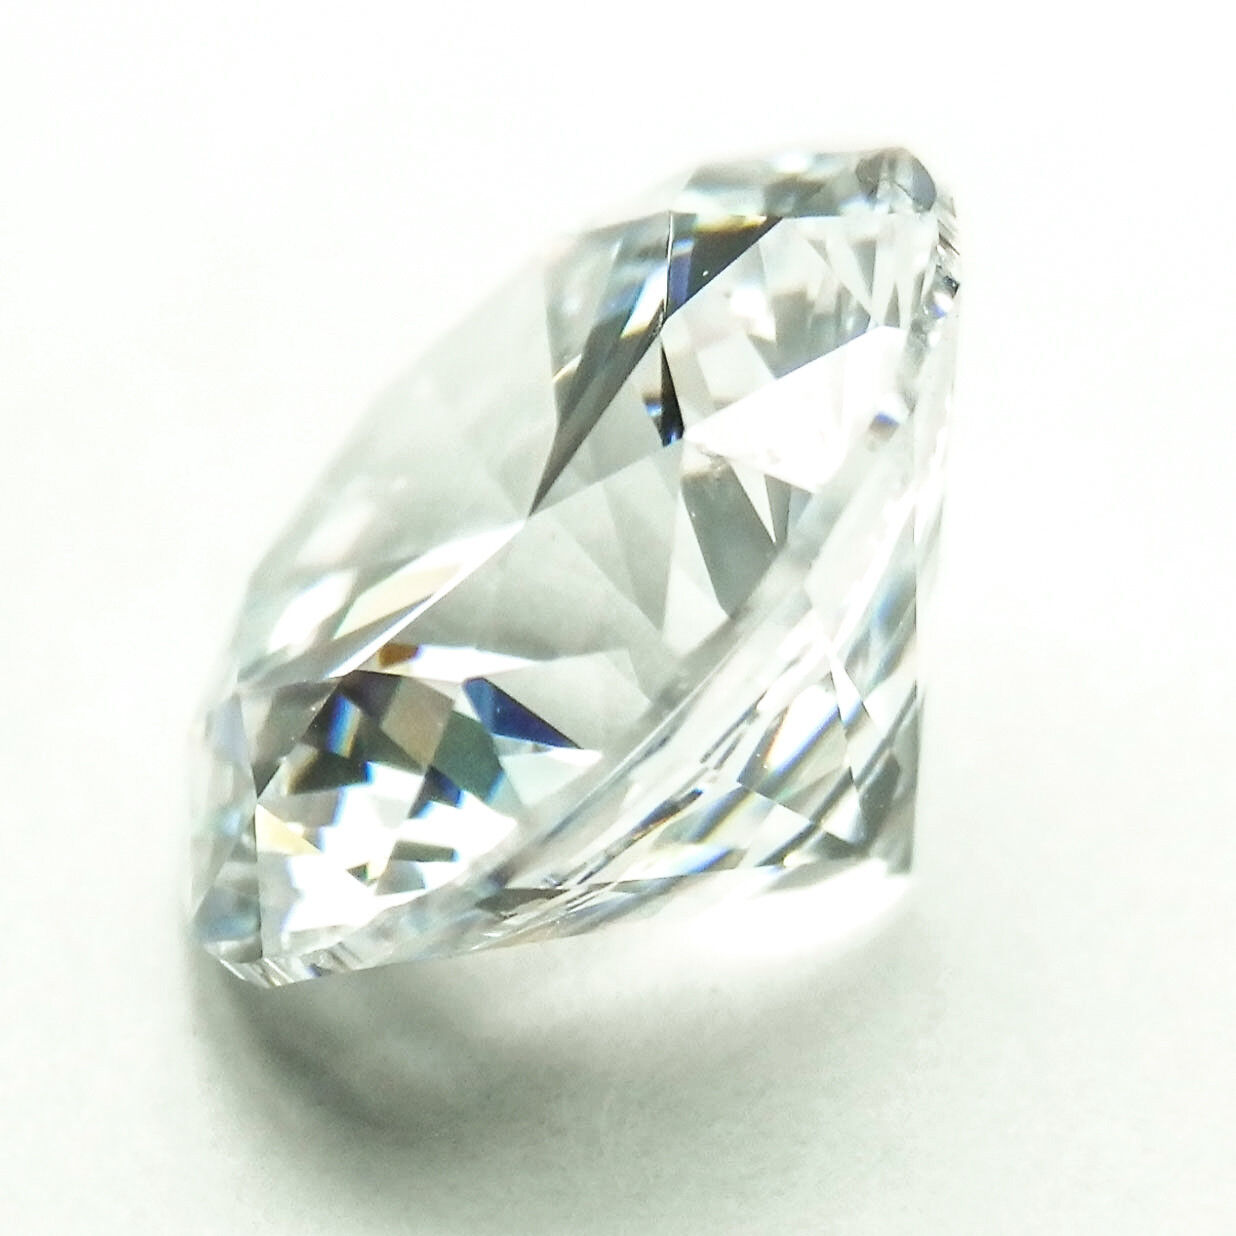 1 Carat Round White Color My Russian Diamond Simulated Lab Created Loose Stone